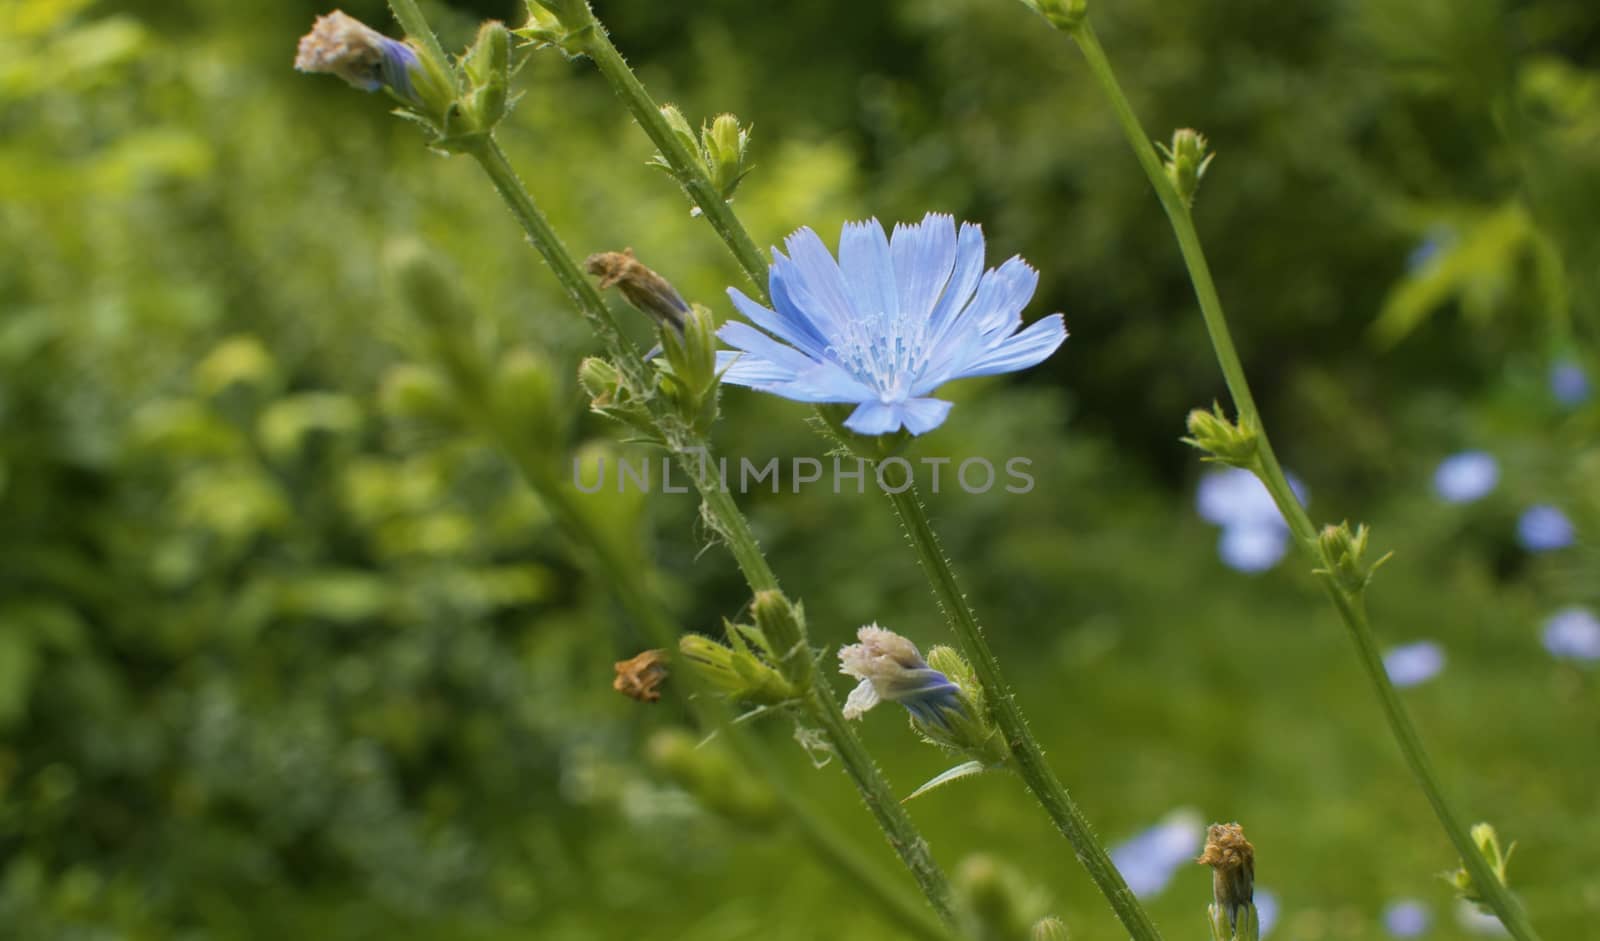 Blue chicory flower in the grass by Alize